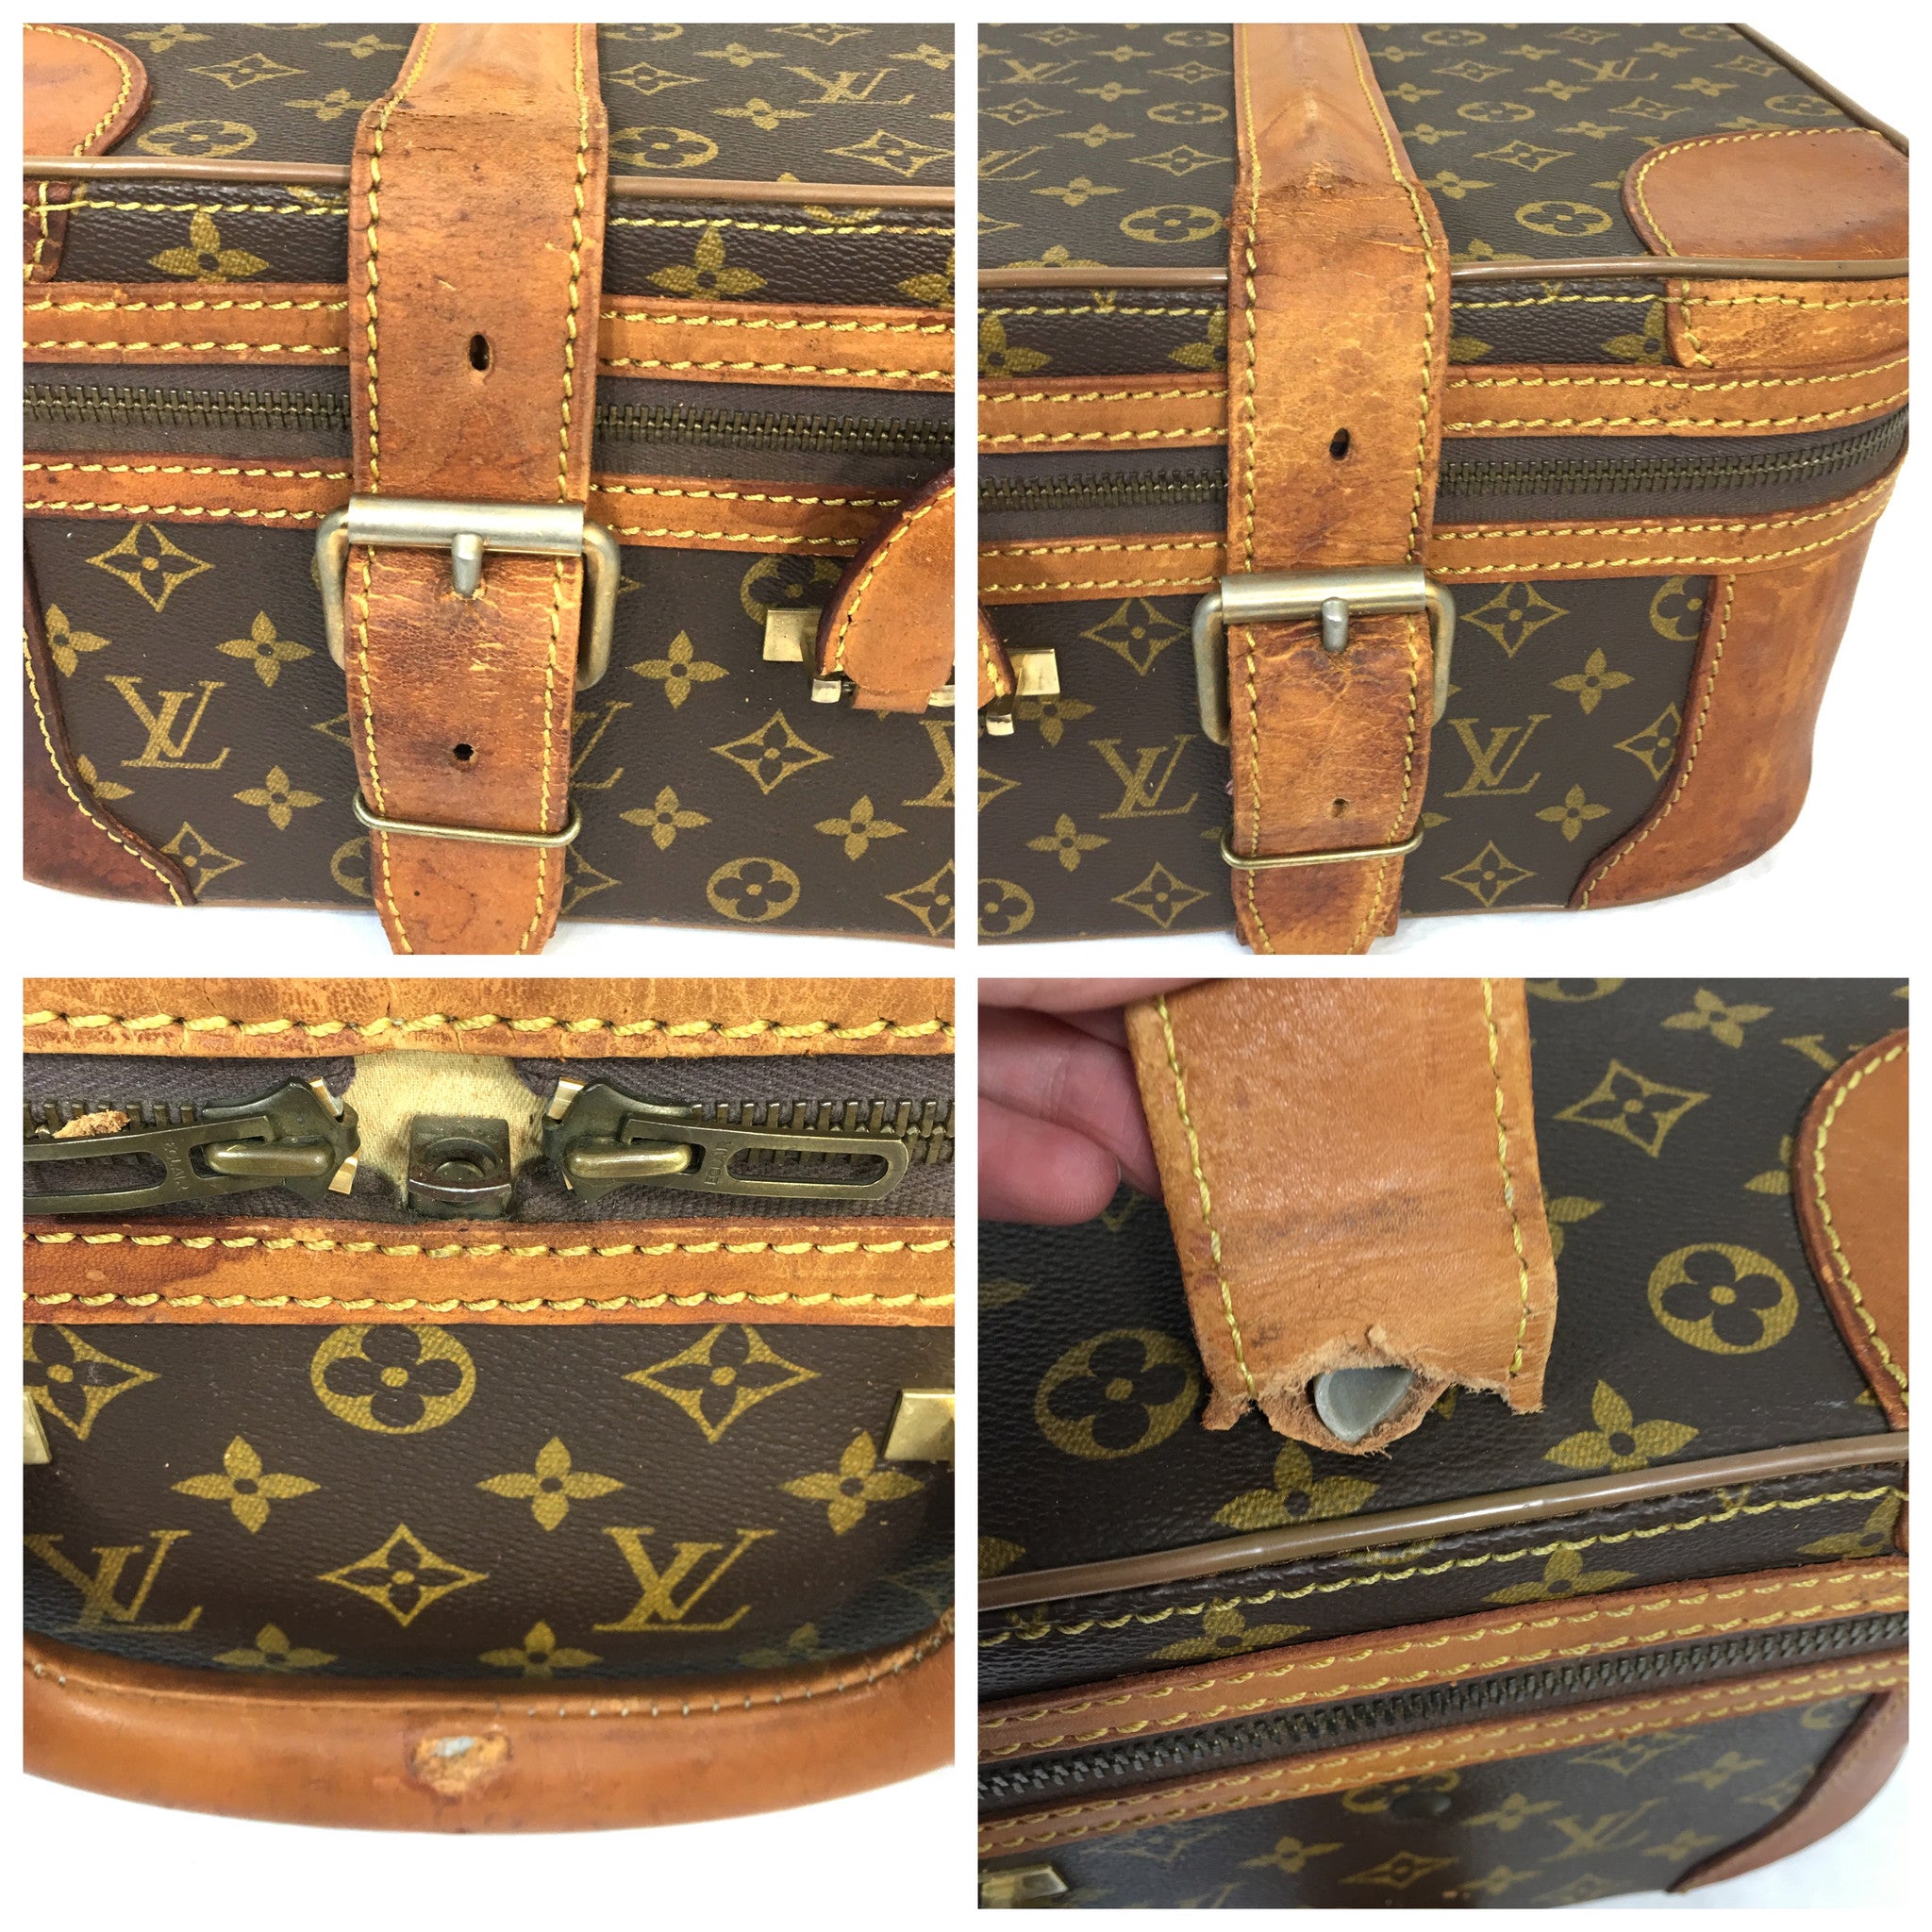 Find many great new & used options and get the best deals for Rare Vintage Louis  Vuitton Custom Clear Acrylic LV Monogram Moët Suitcase Trunk at the be…